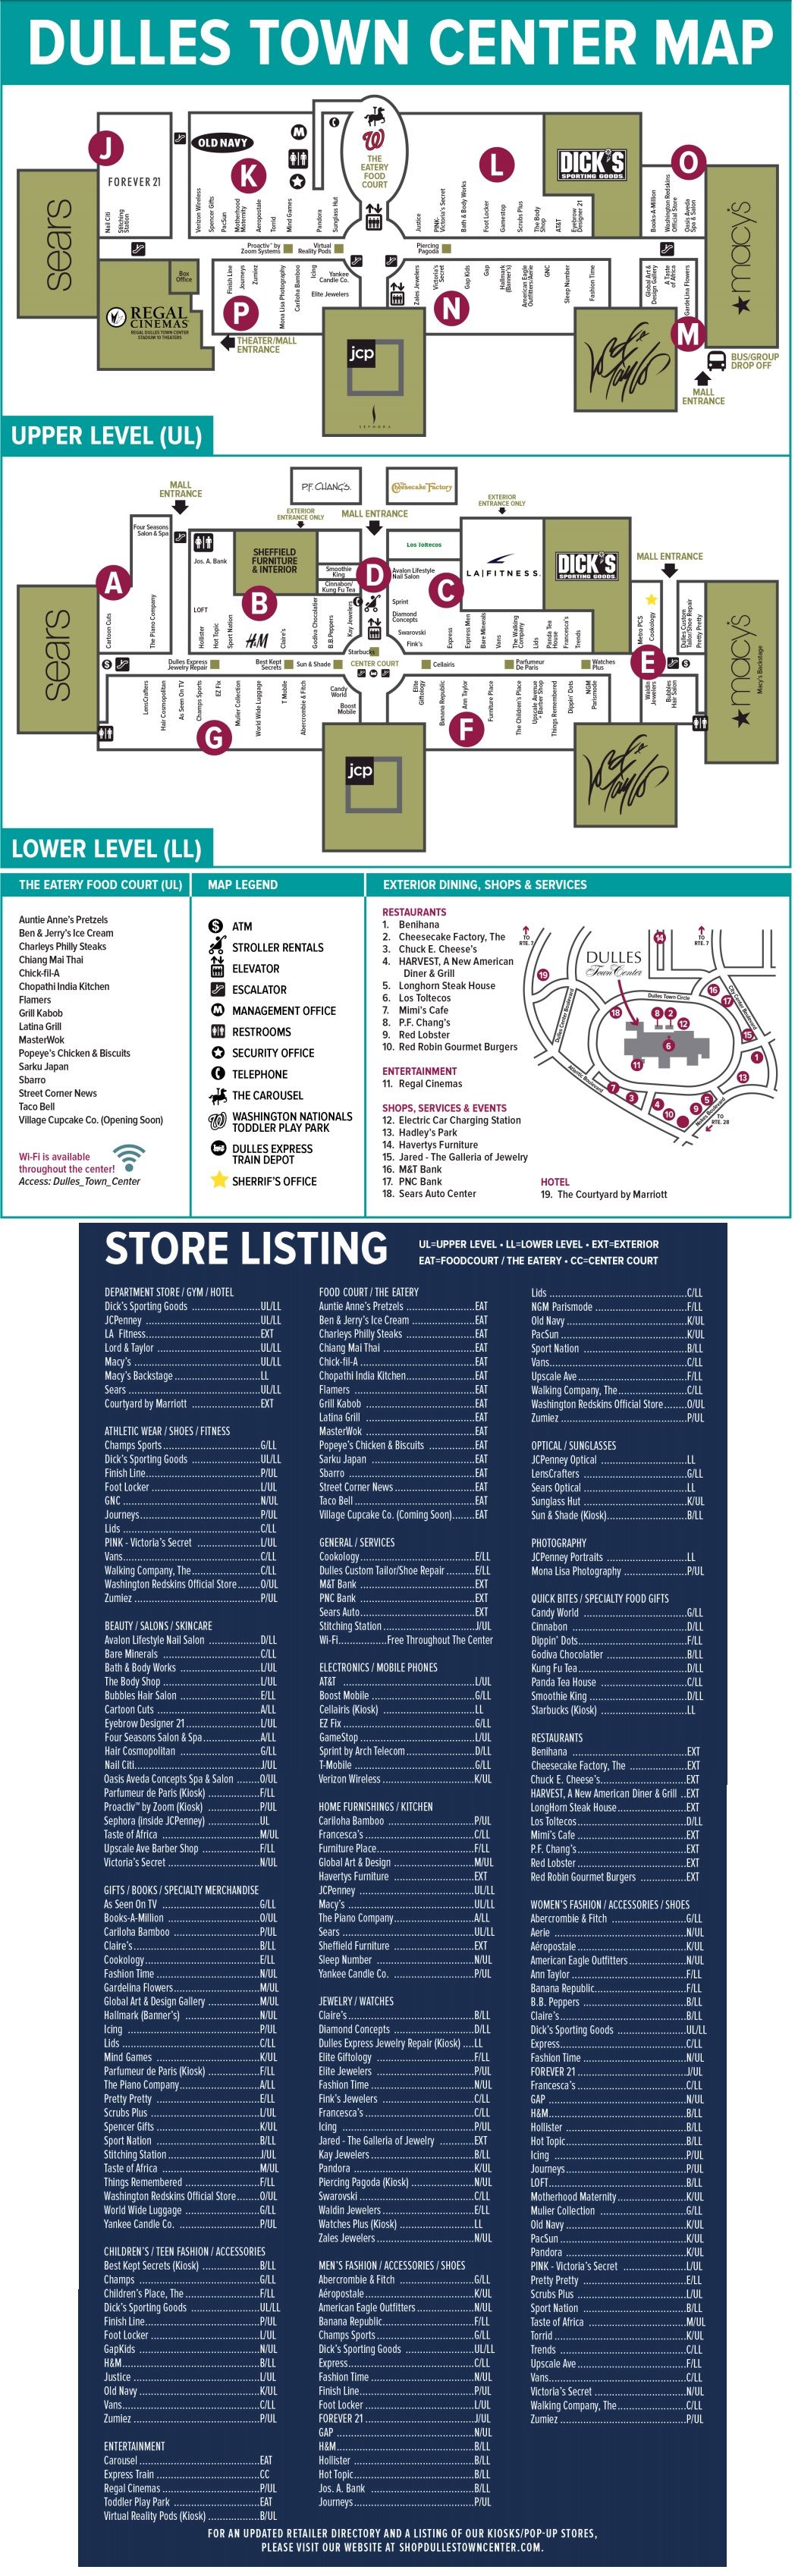 Dulles Town Center (135 stores) shopping in Dulles